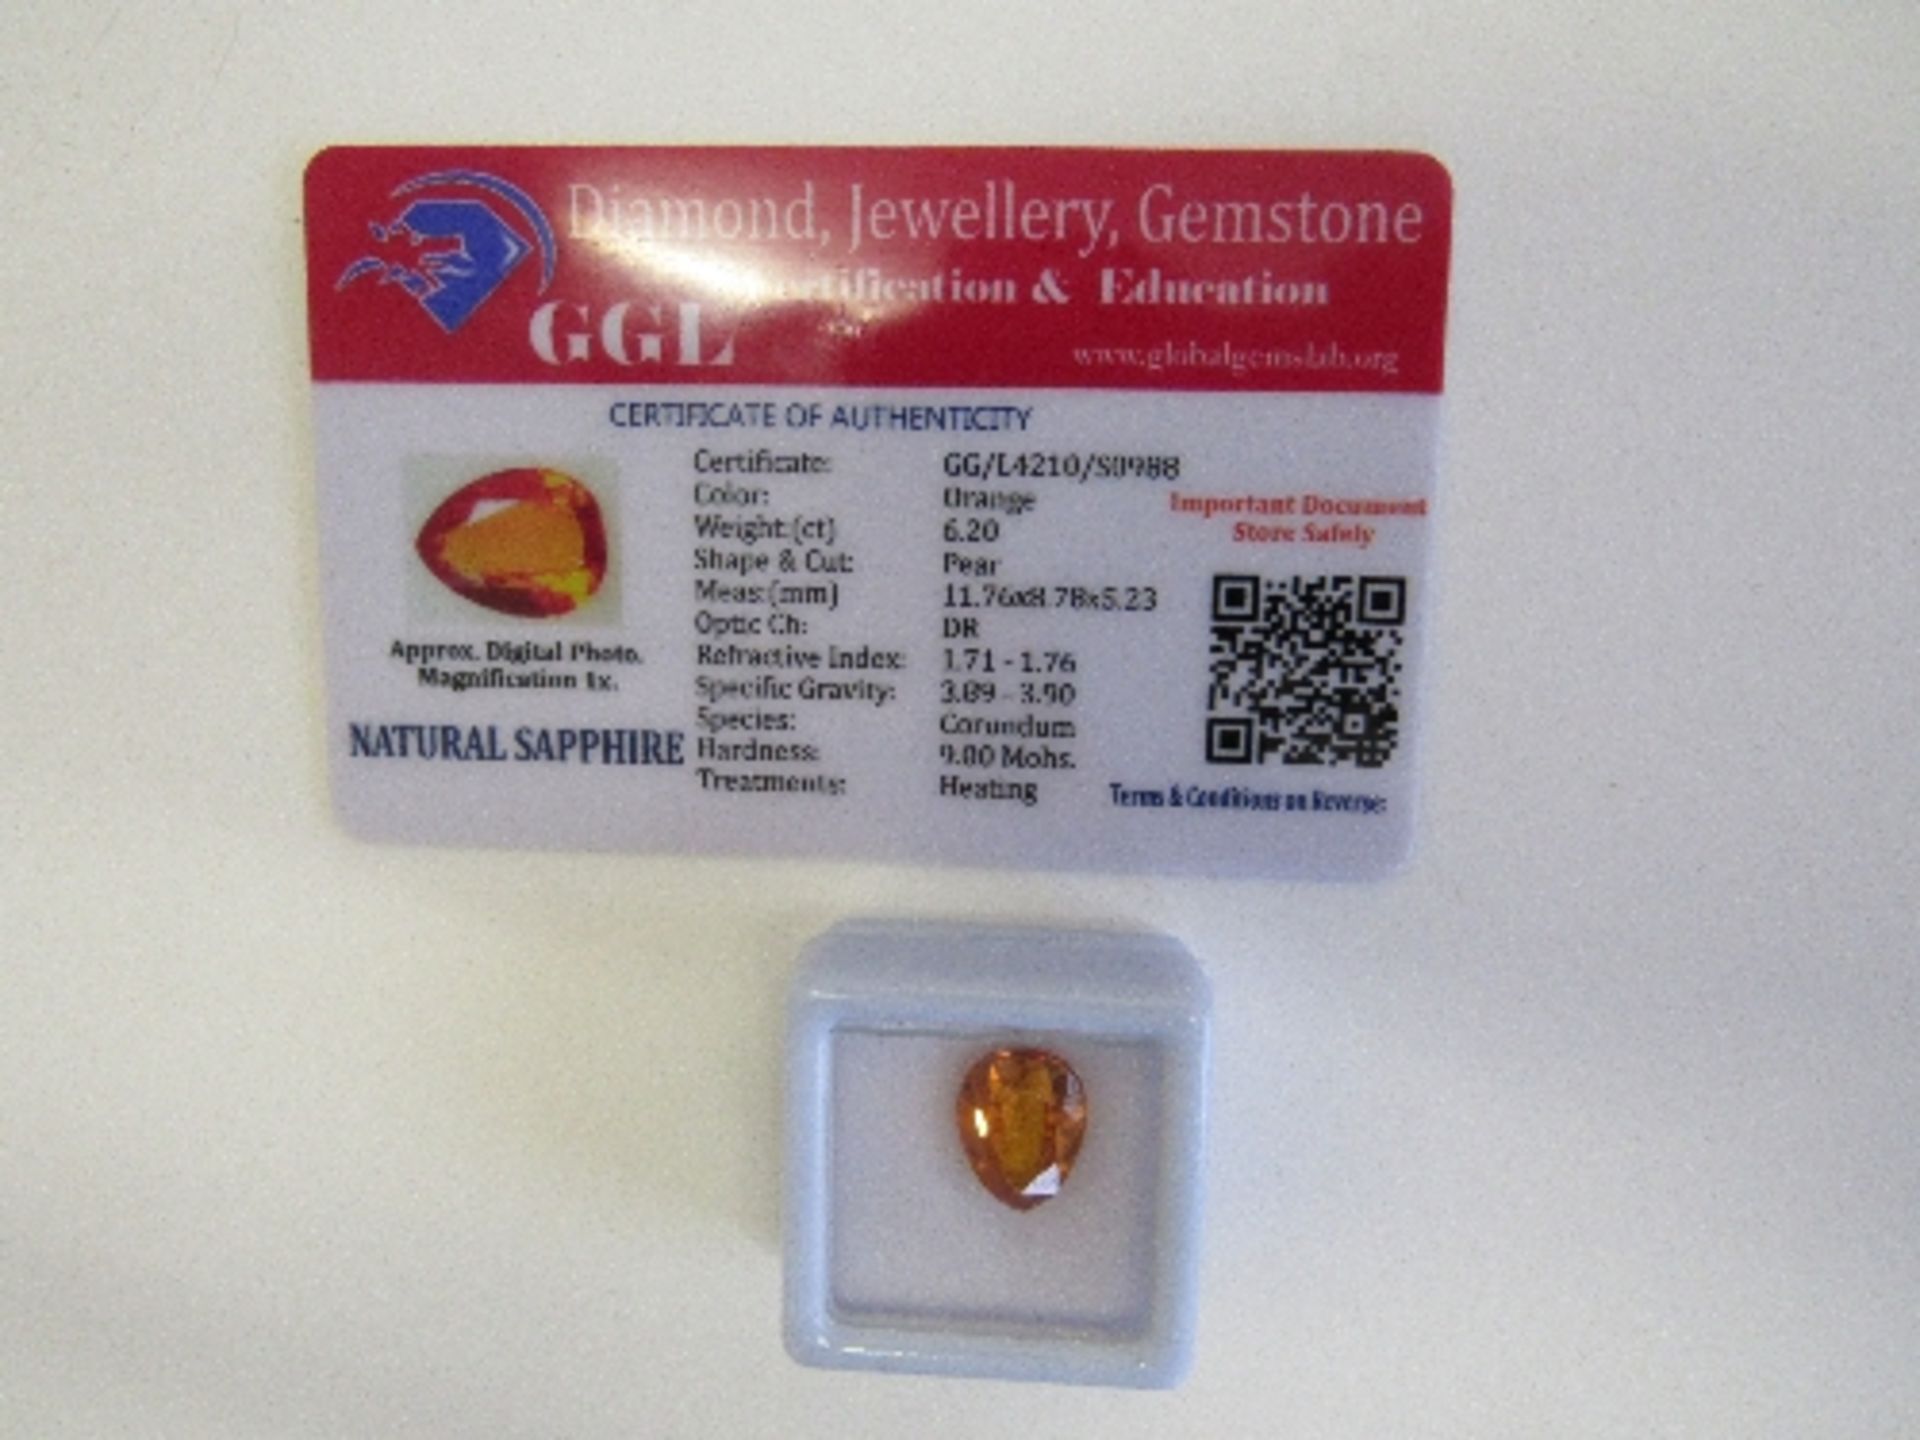 Natural pear cut loose sapphire, weight 6.20 carat, with certificate. Estimate £50-70. - Image 2 of 2